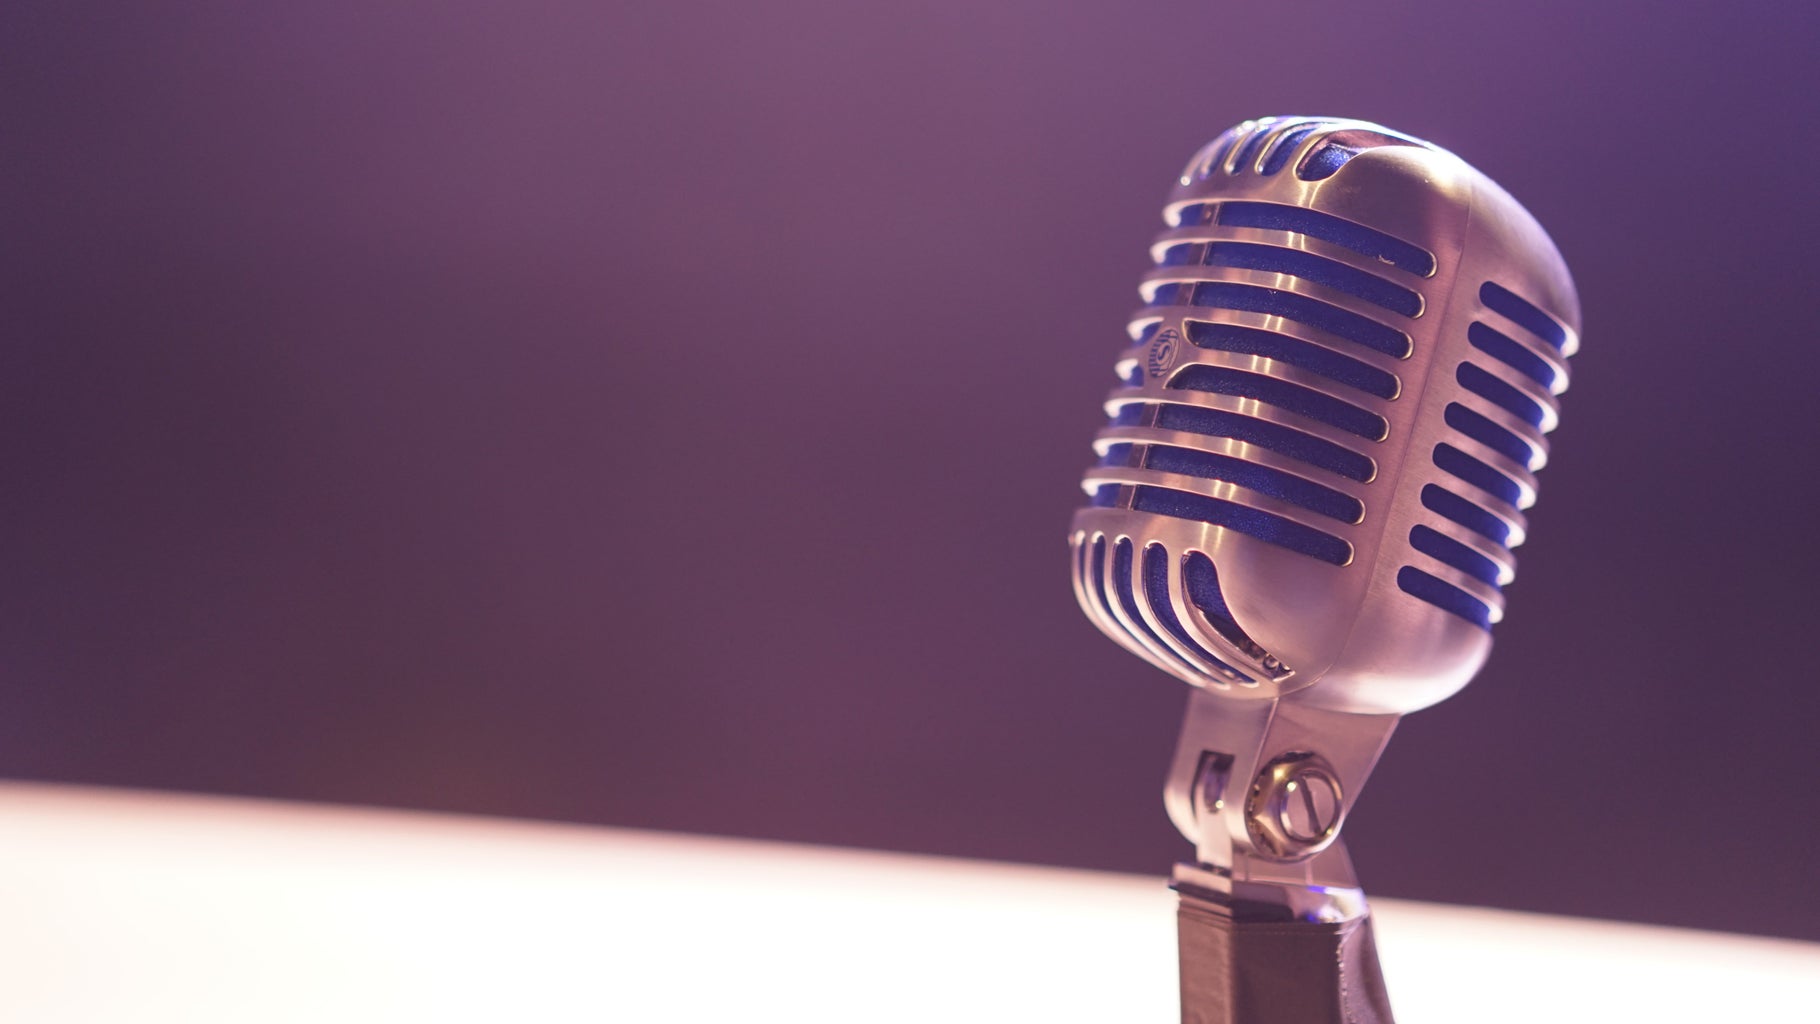 old fashioned crome microphone in front of a purple background